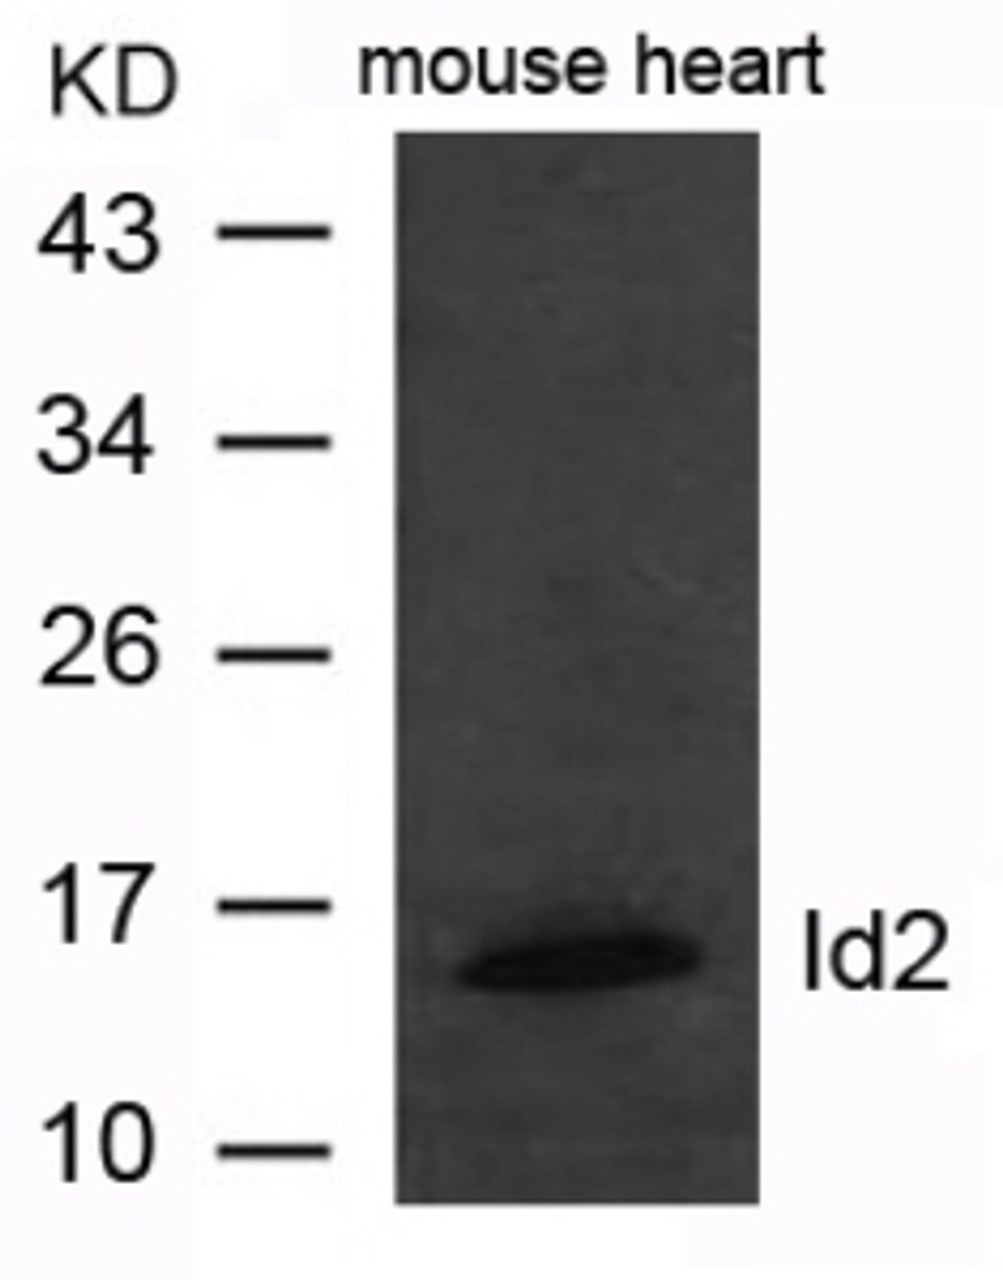 Western blot analysis of extract from mouse heart tissue using Id2 Antibody.